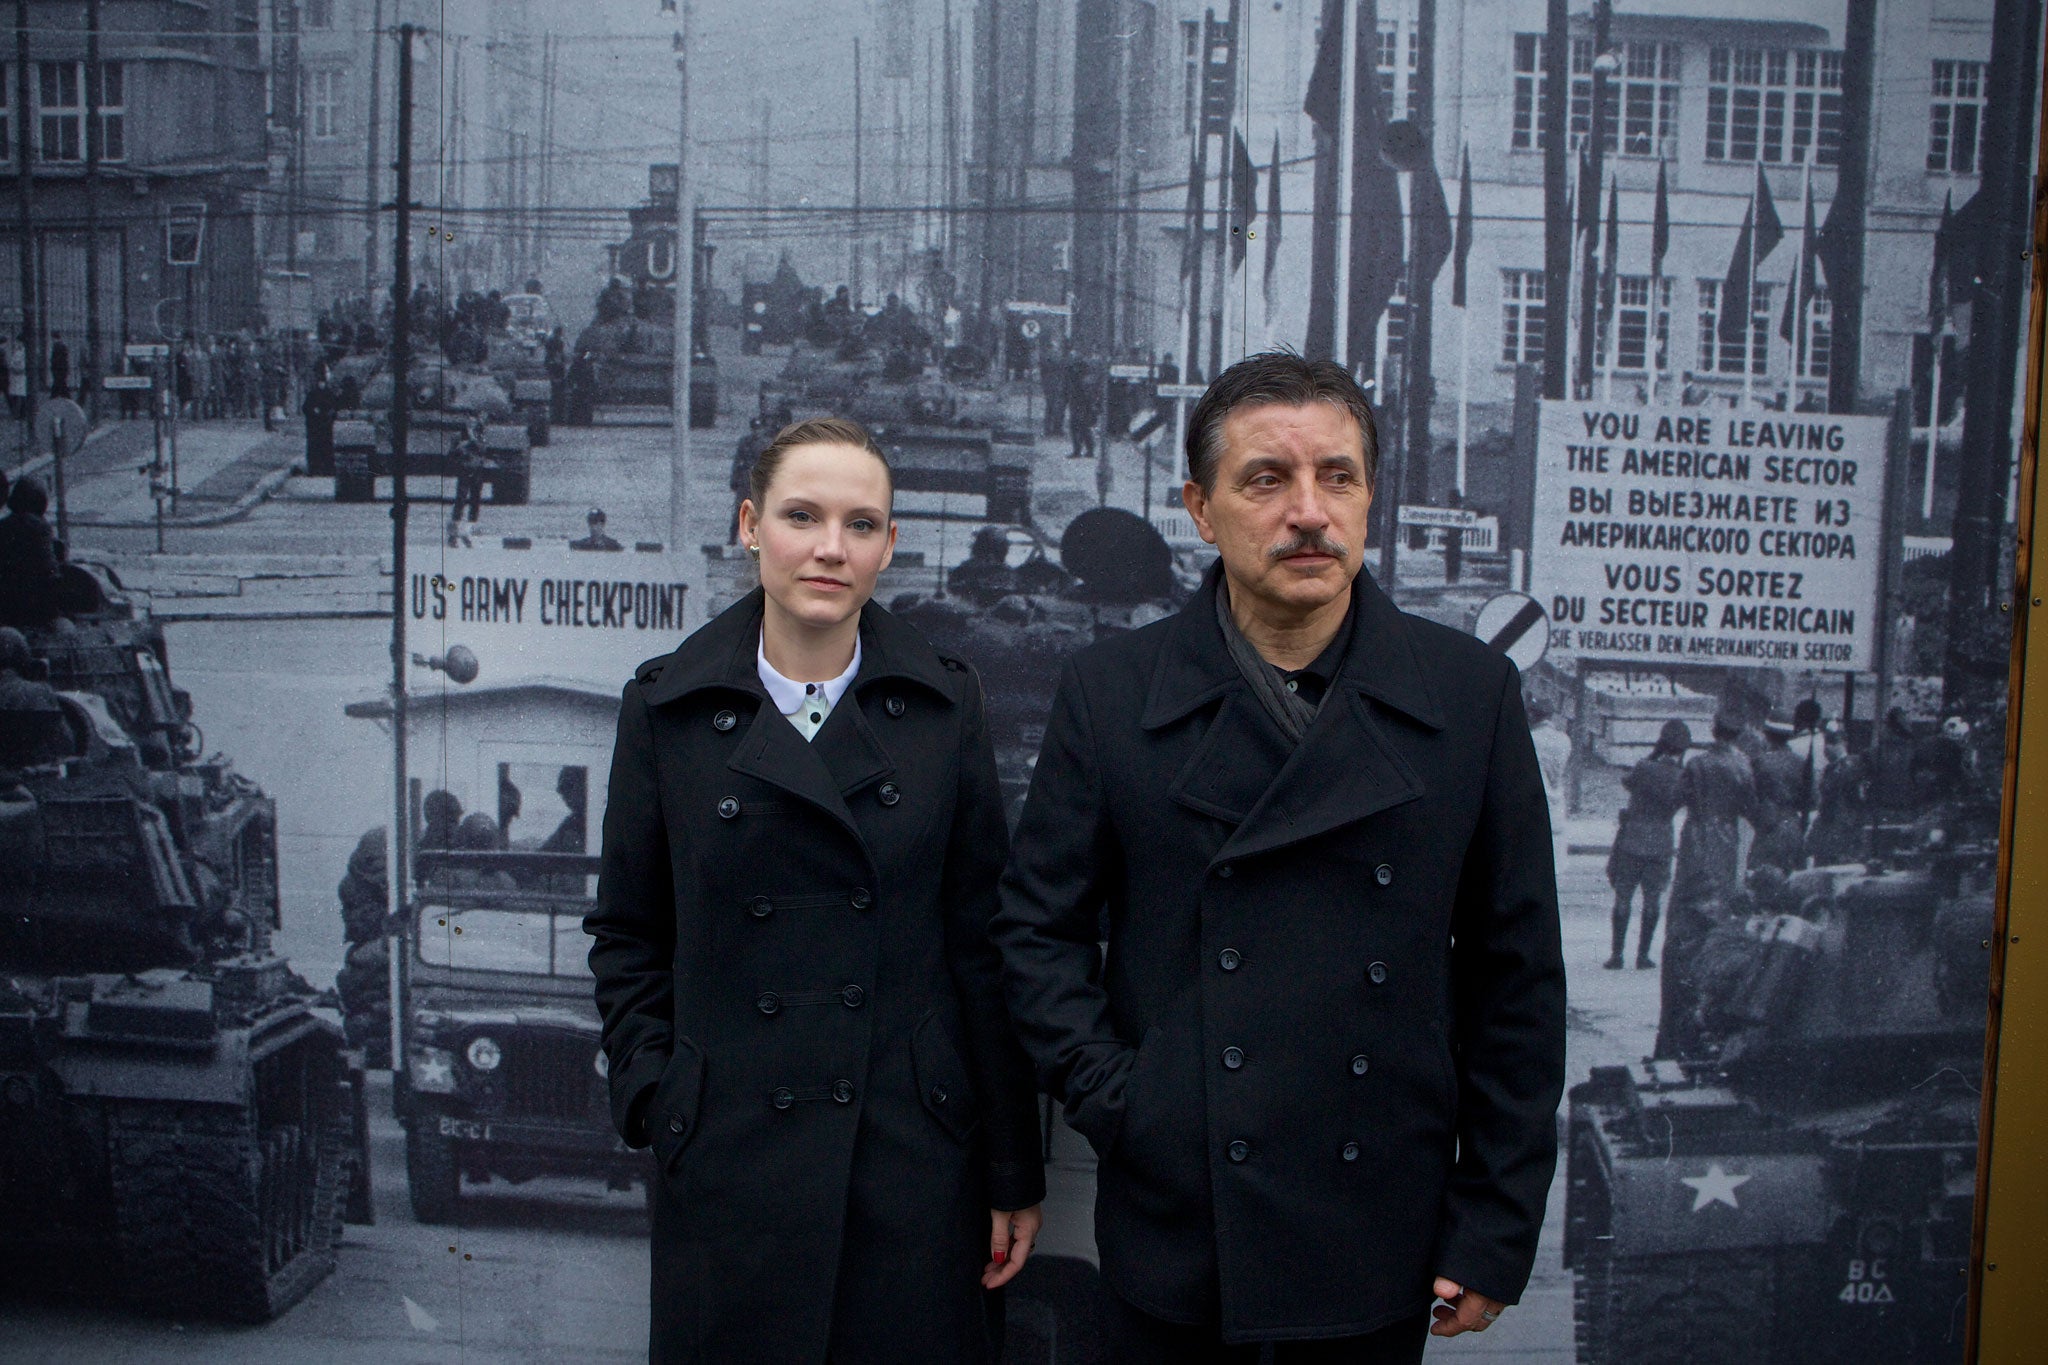 Hans-Peter Spitzner with his daughter Peggy (who was seven when
they crossed the wall), photographed last month at Checkpoint Charlie in Berlin